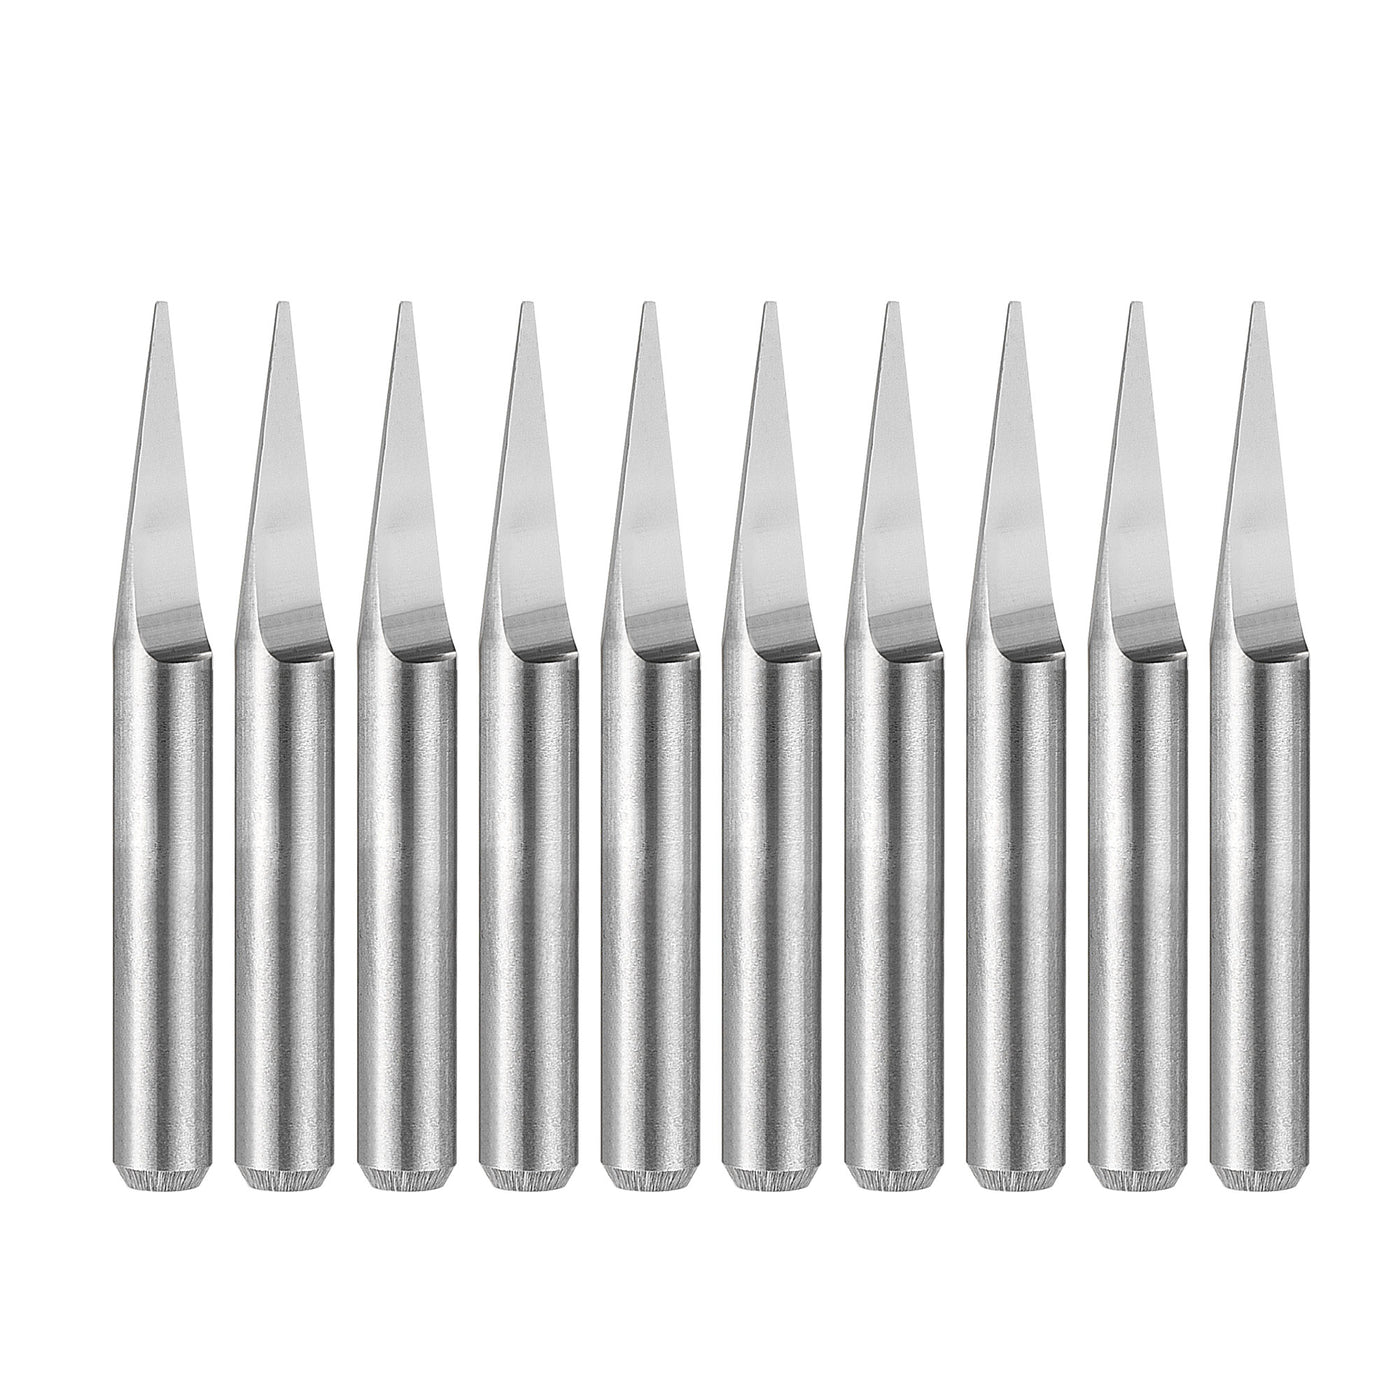 uxcell Uxcell 1/8" Shank 0.5mm Tip 20 Degree Carbide Wood Engraving Bit CNC Router Tool 10pcs